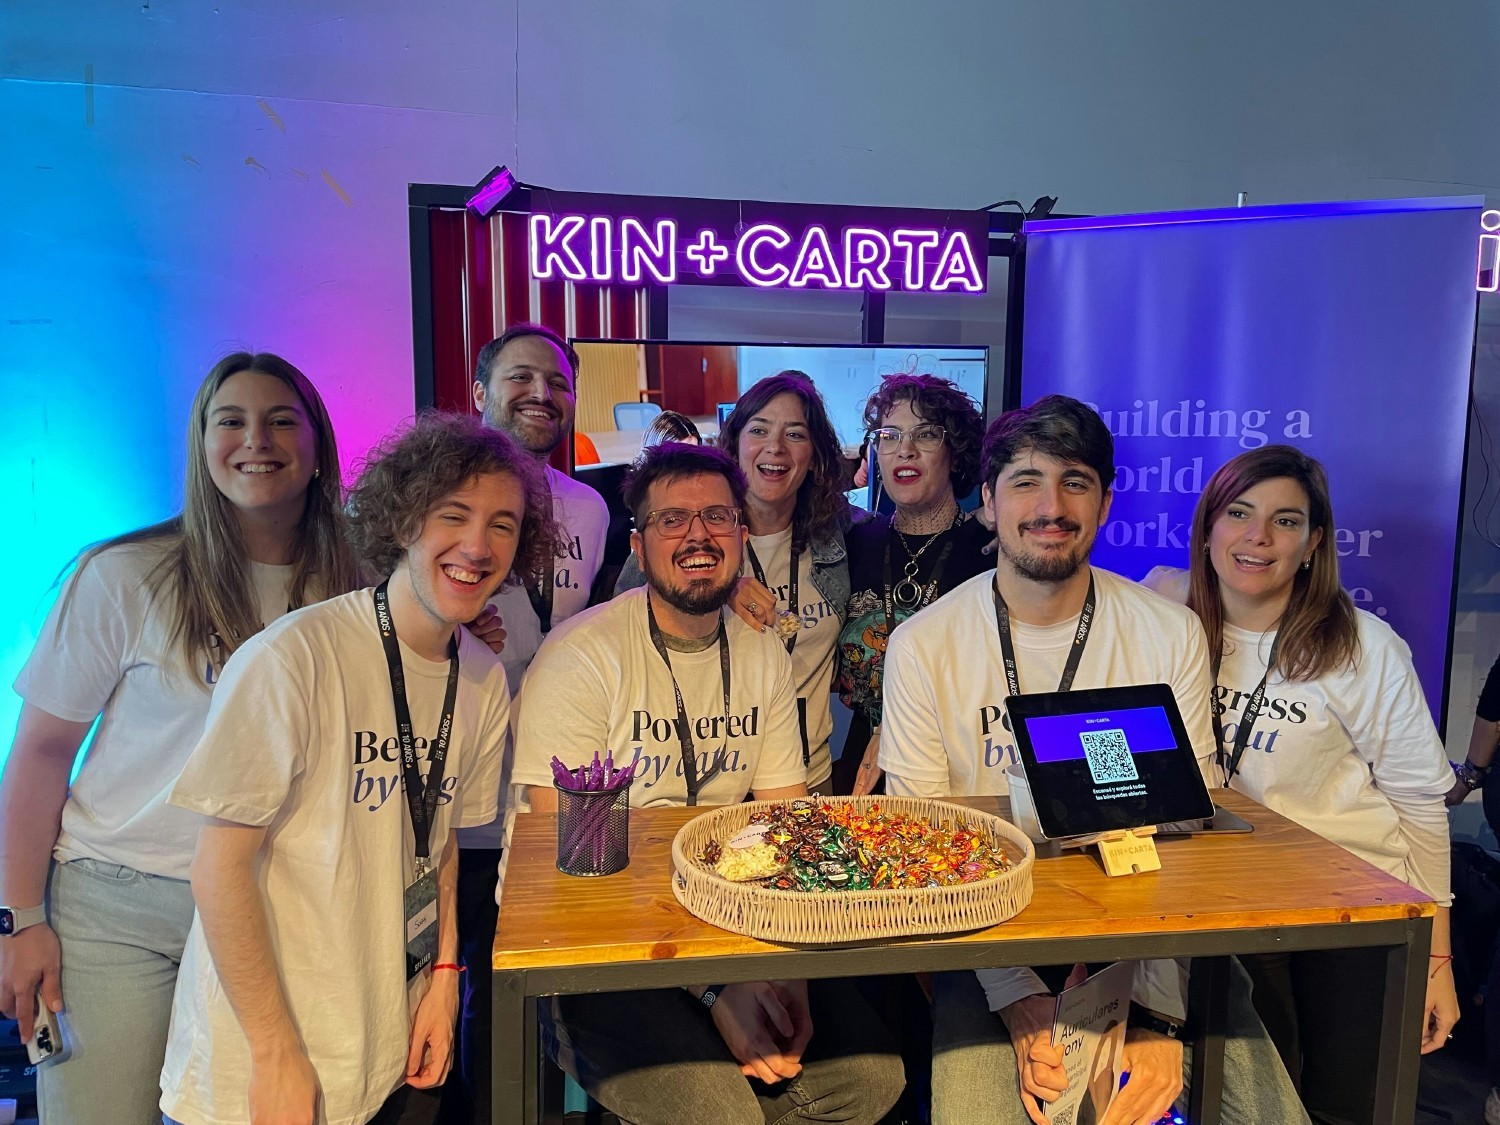 Buenos Aires Kin representing Kin + Carta at this year's HackerX event!